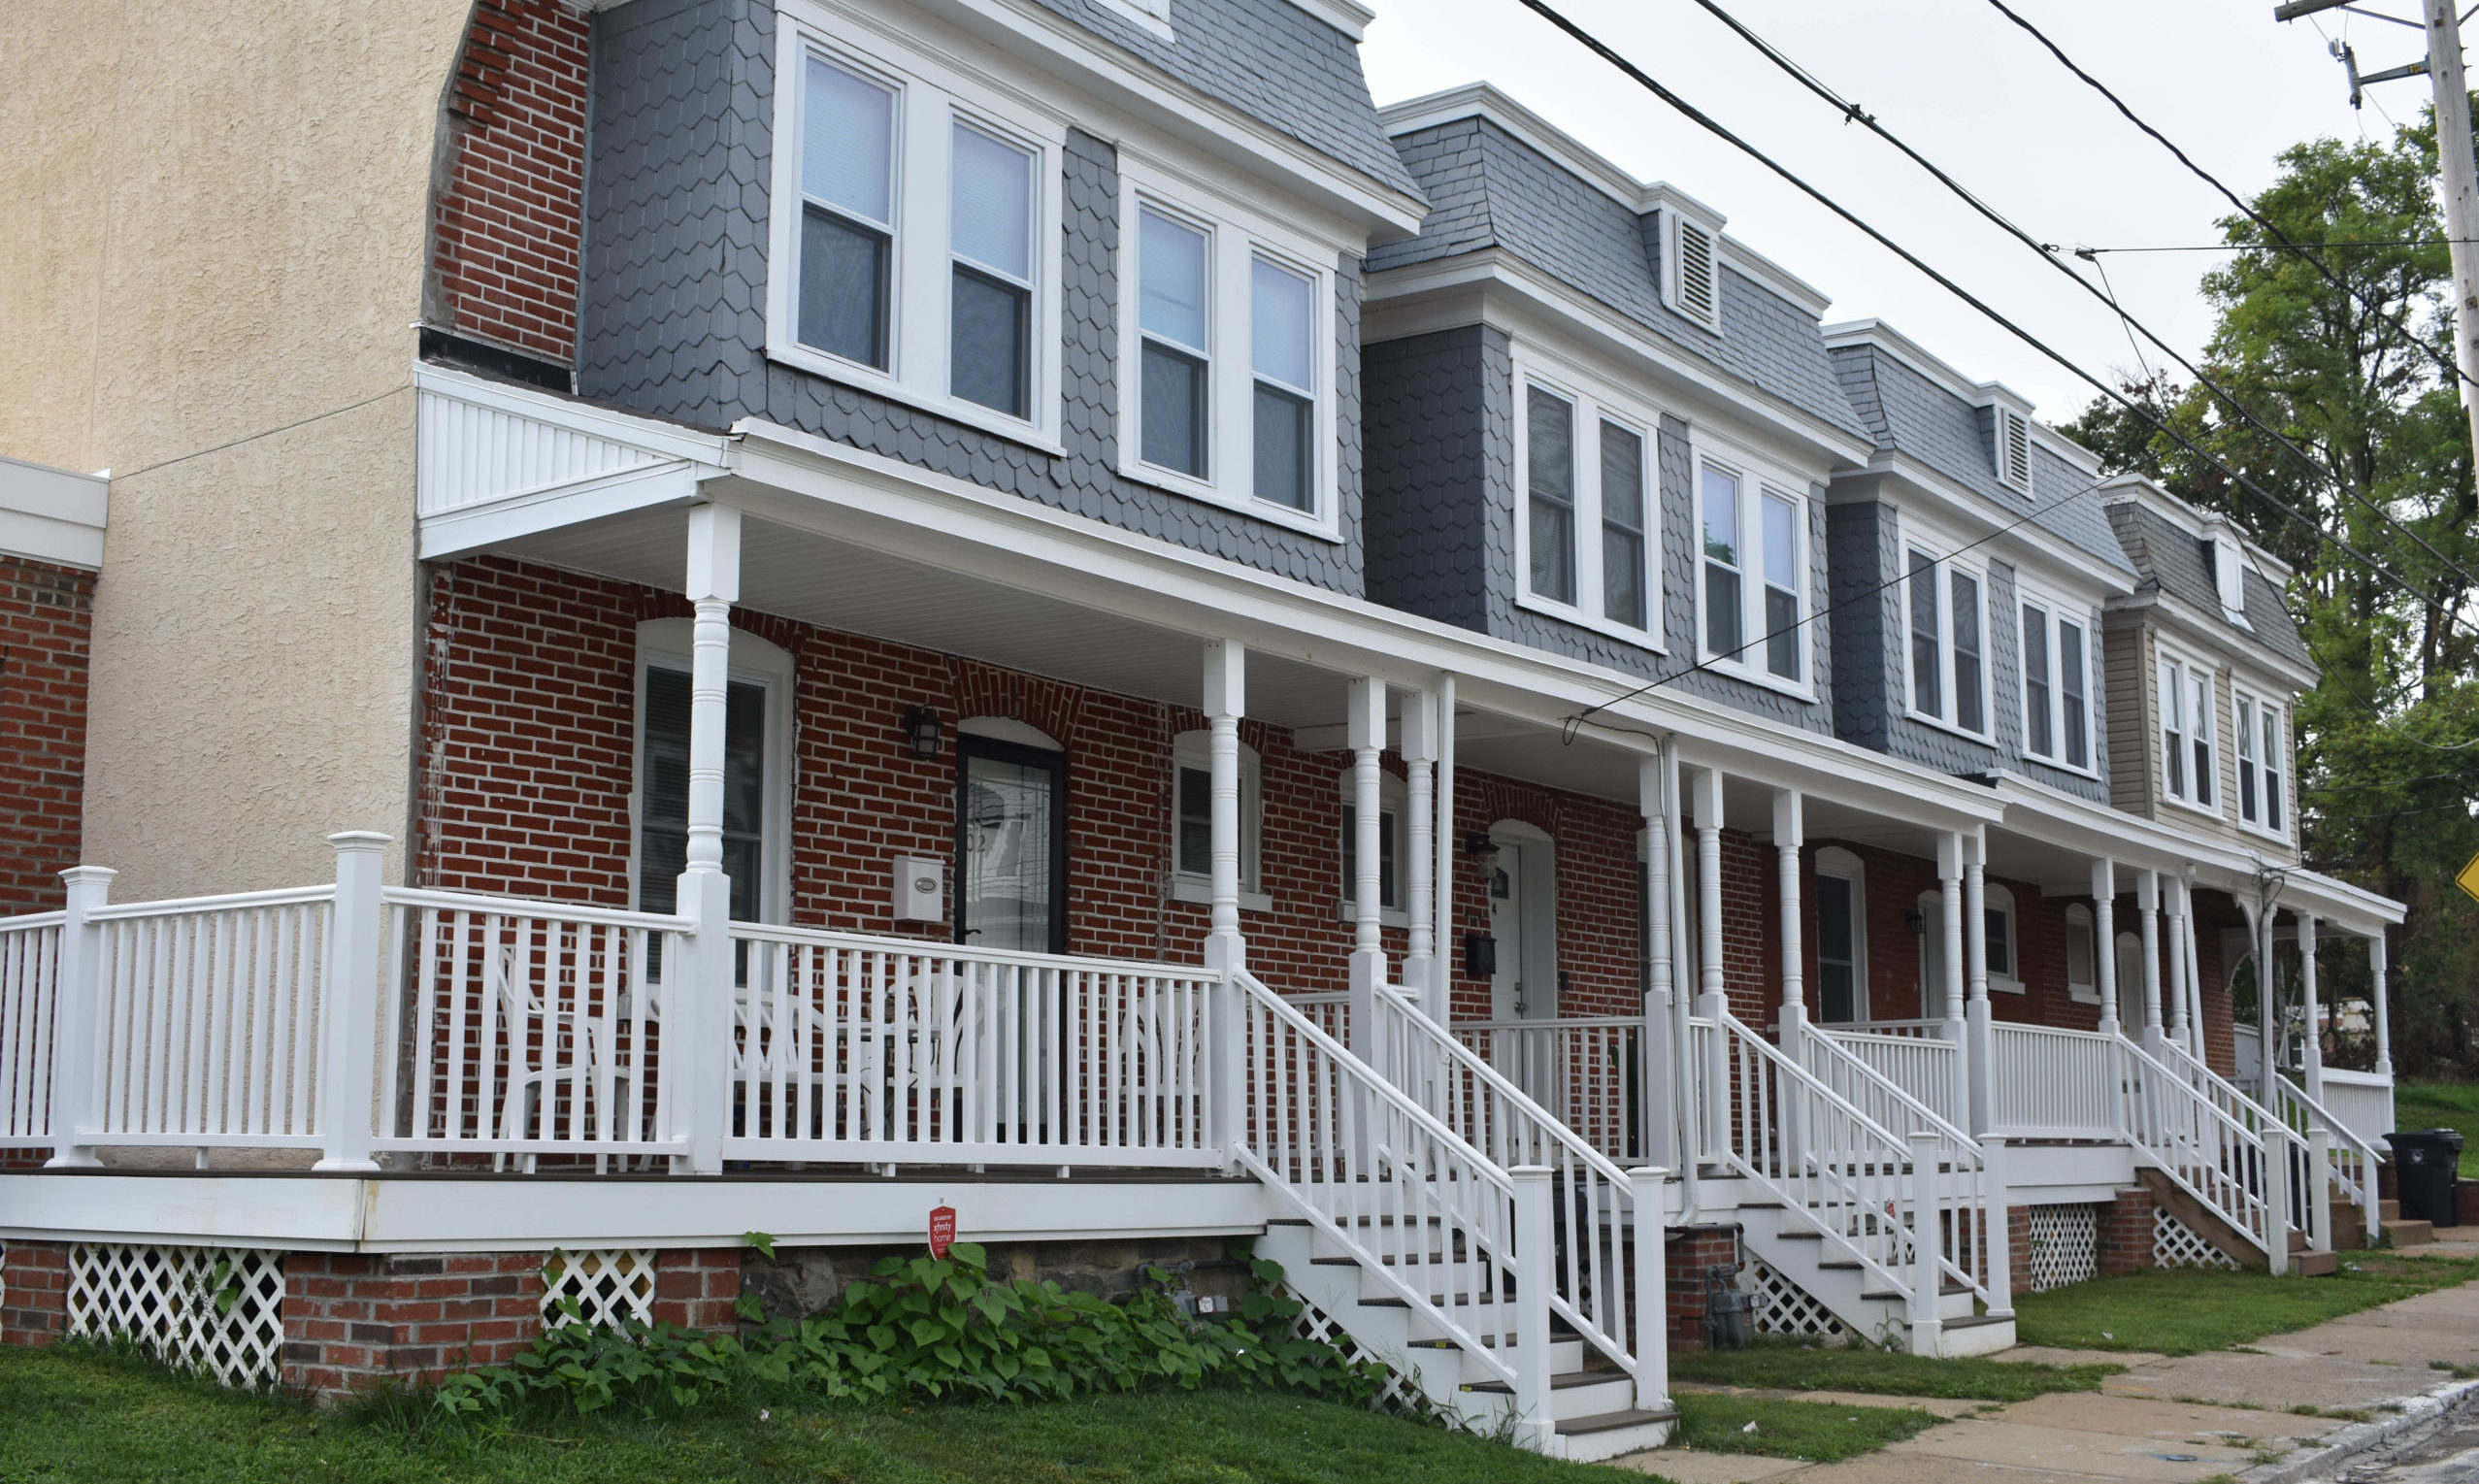 Homeownership and Development Policies ﻿to Reverse the Legacy of Discrimination and Disinvestment in Wilmington